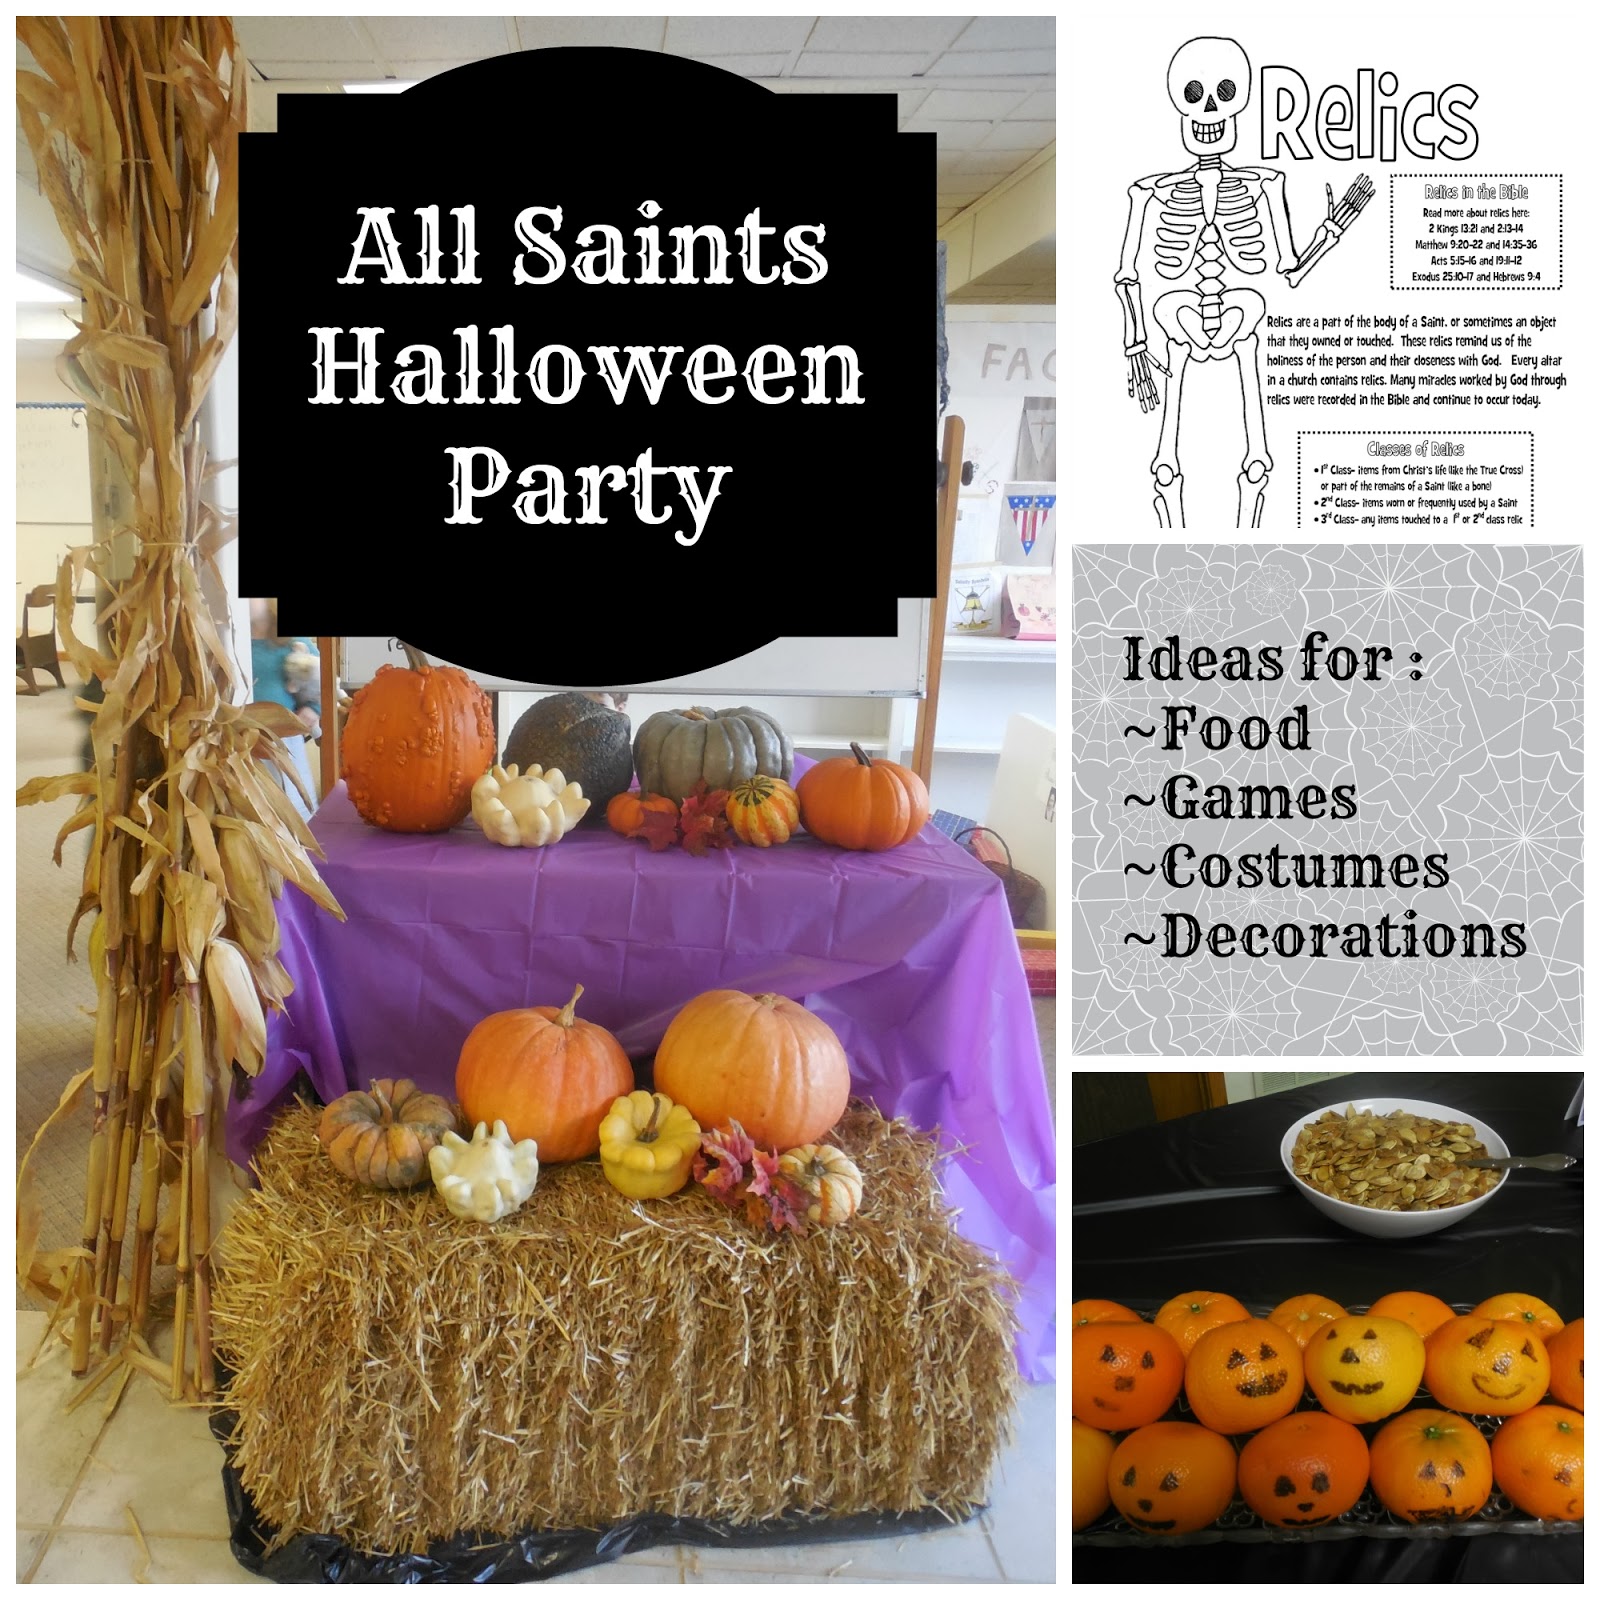 ☀ How is halloween connected to all saints day